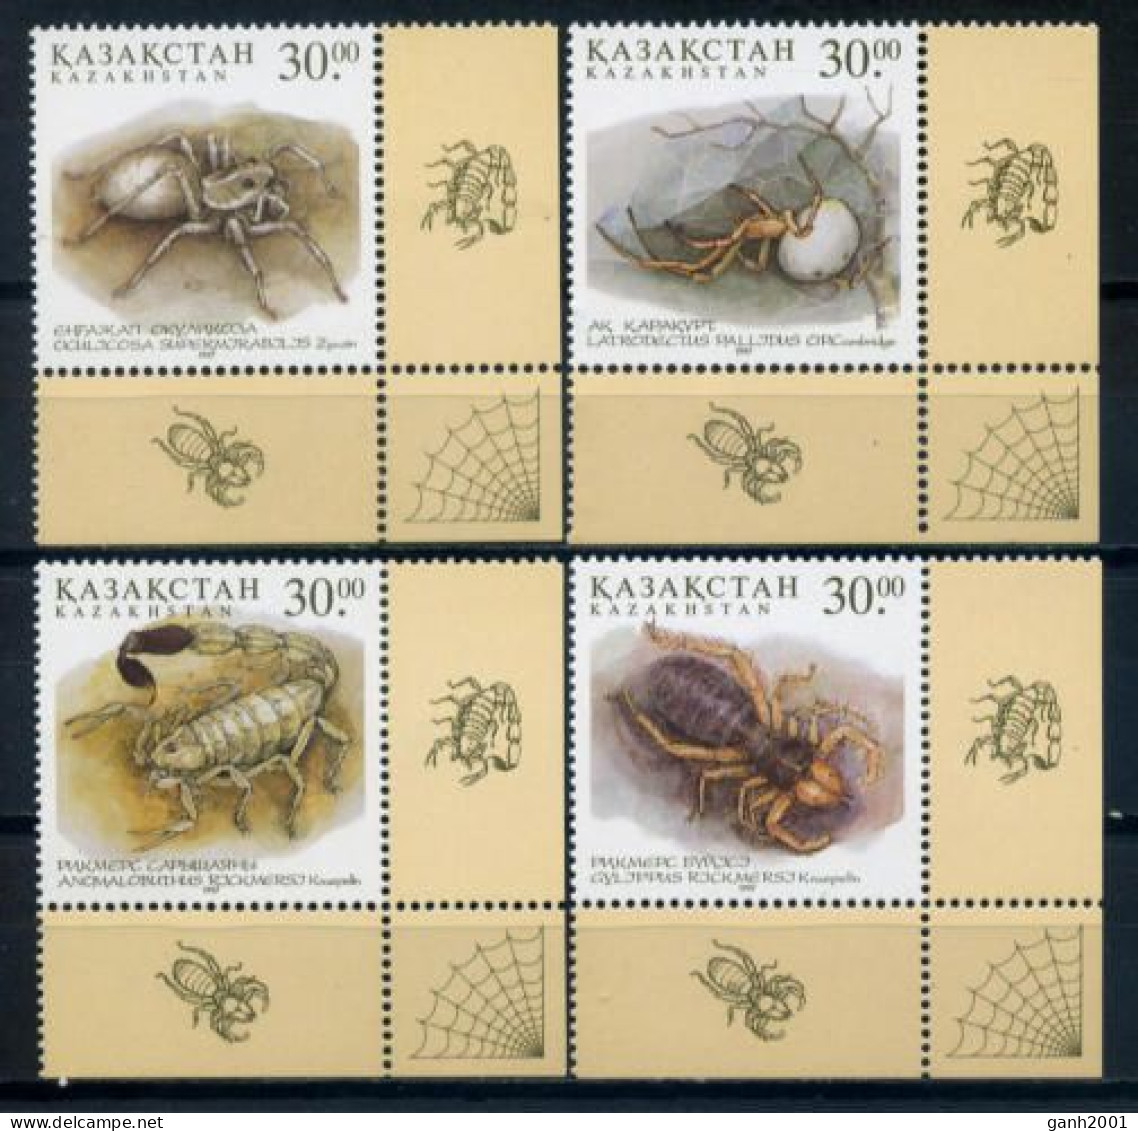 Kazakhstan 1997 / Insects Spiders MNH Insectos Ara&ntilde;as Spinnen / Hi99  2-13 - Ragni